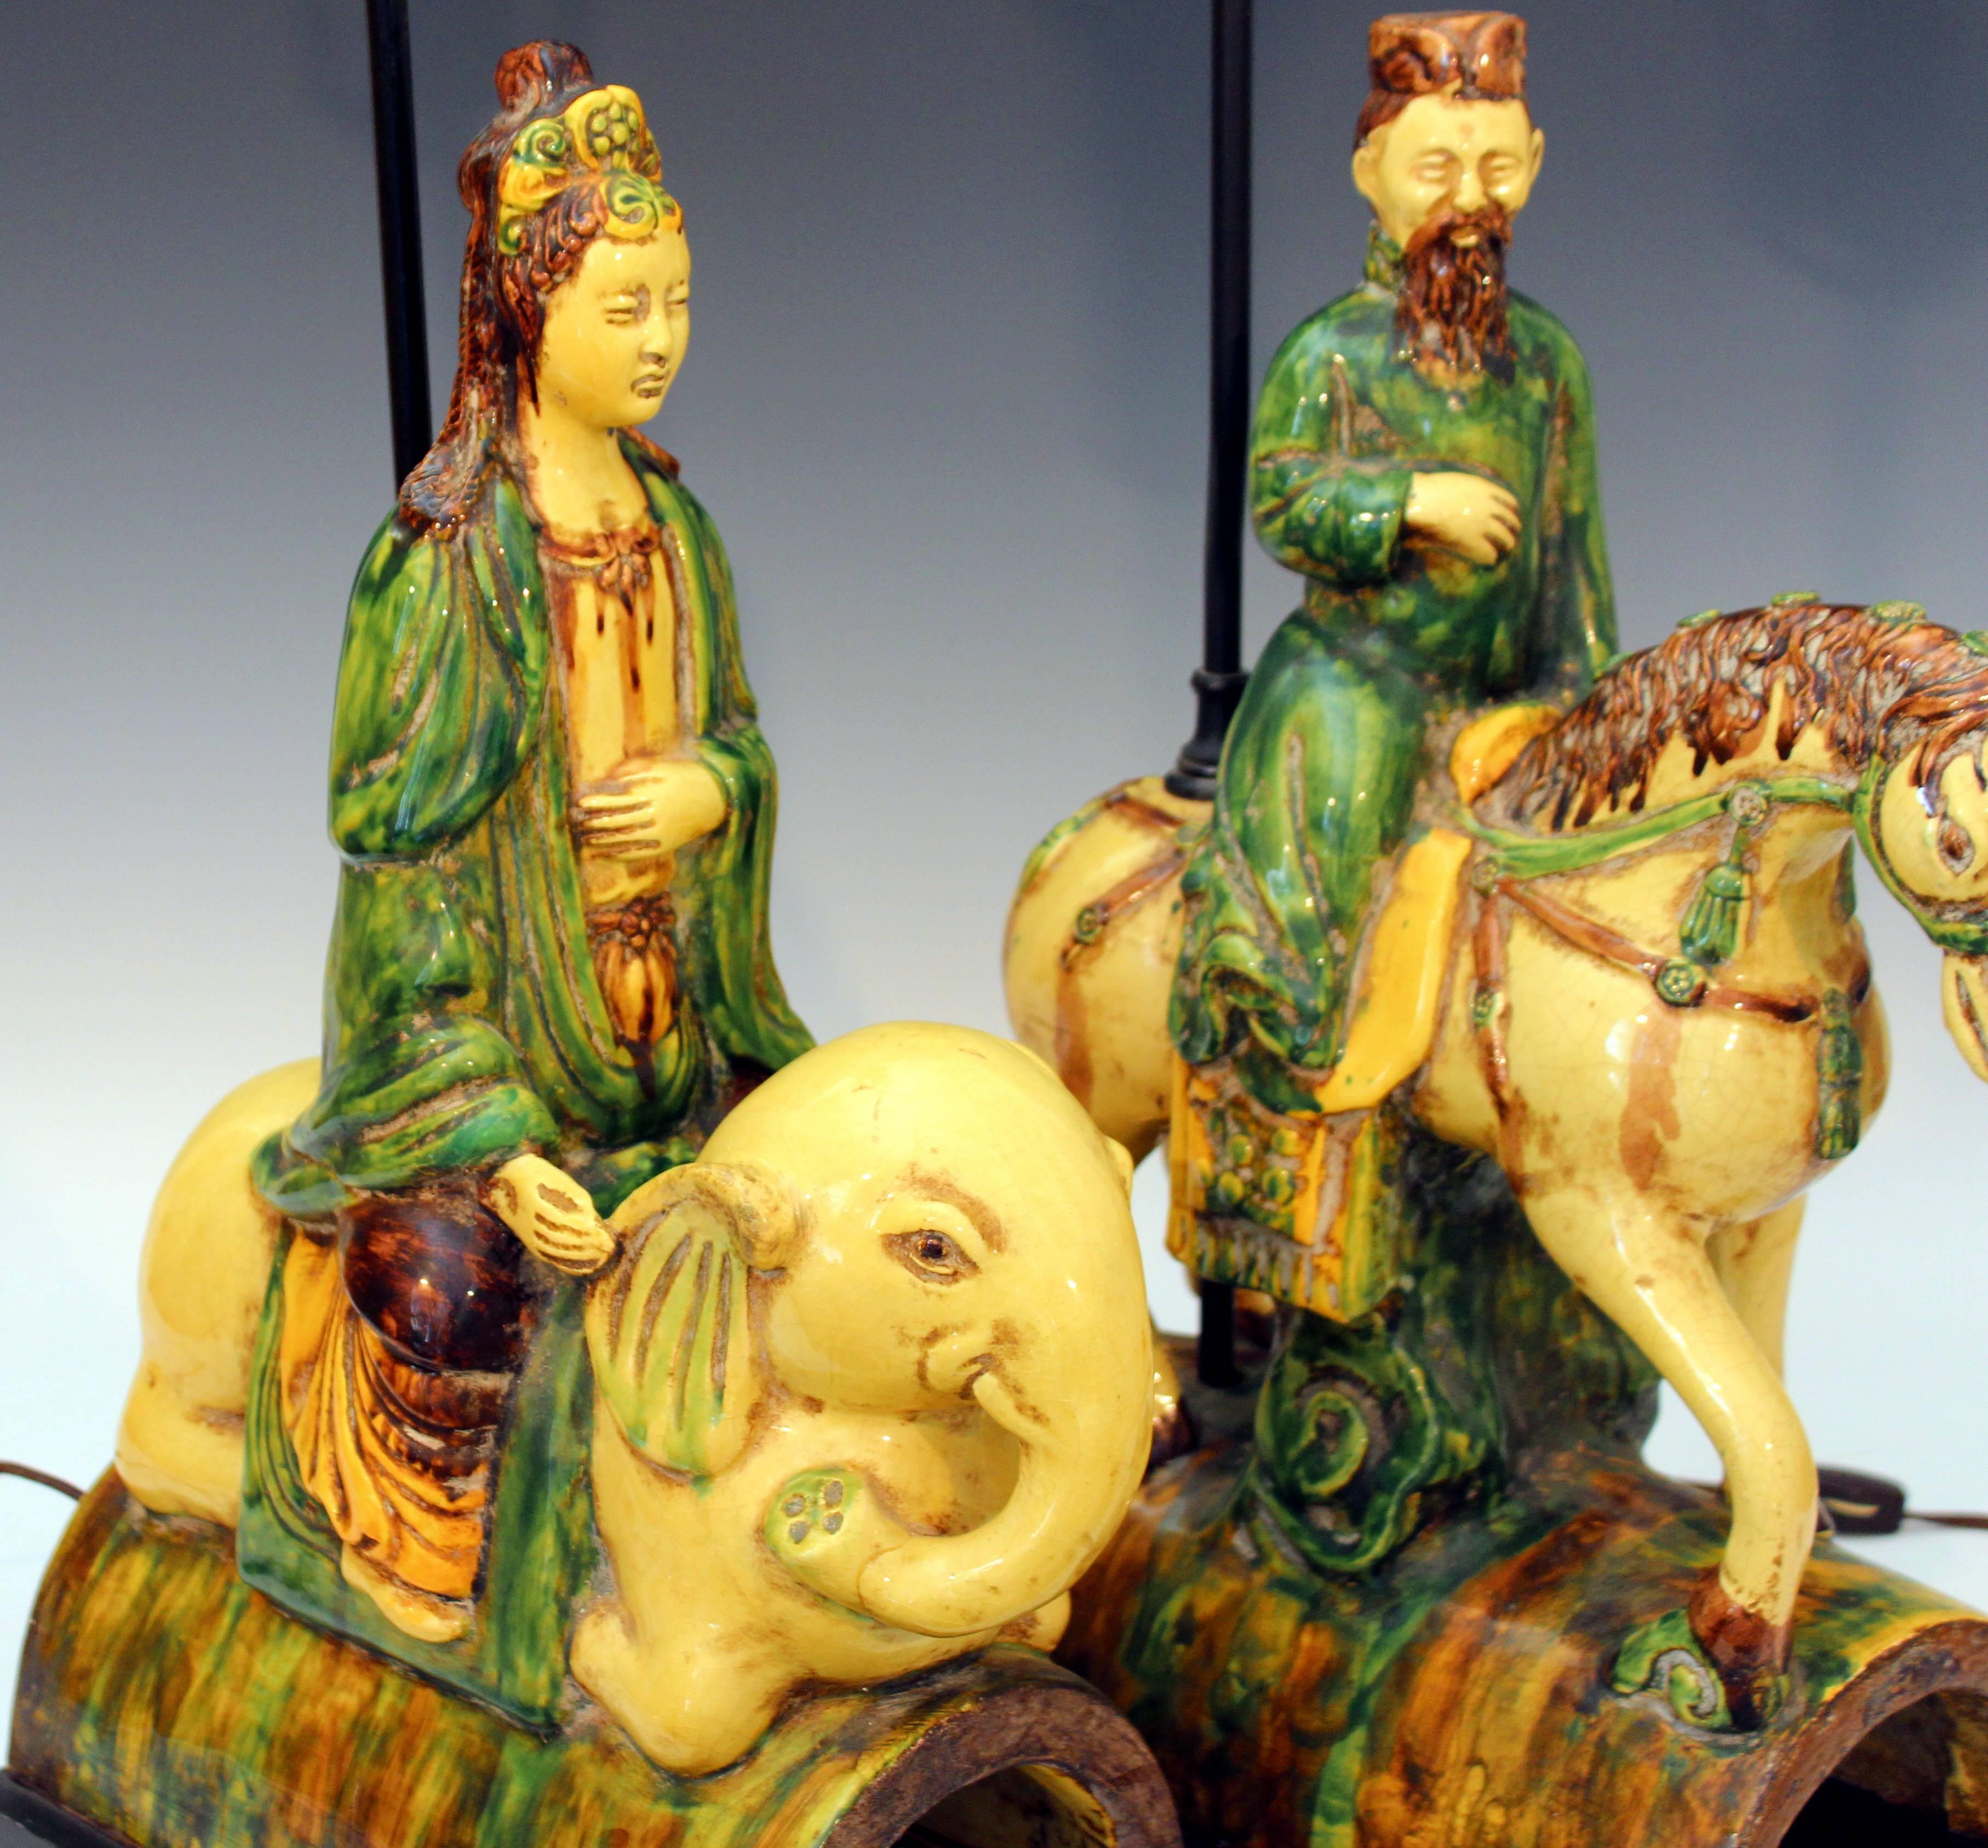 Molded Pair of Zaccagnini Guanyin Buddha Figures Vintage Italian Ming Roof Tile Lamps